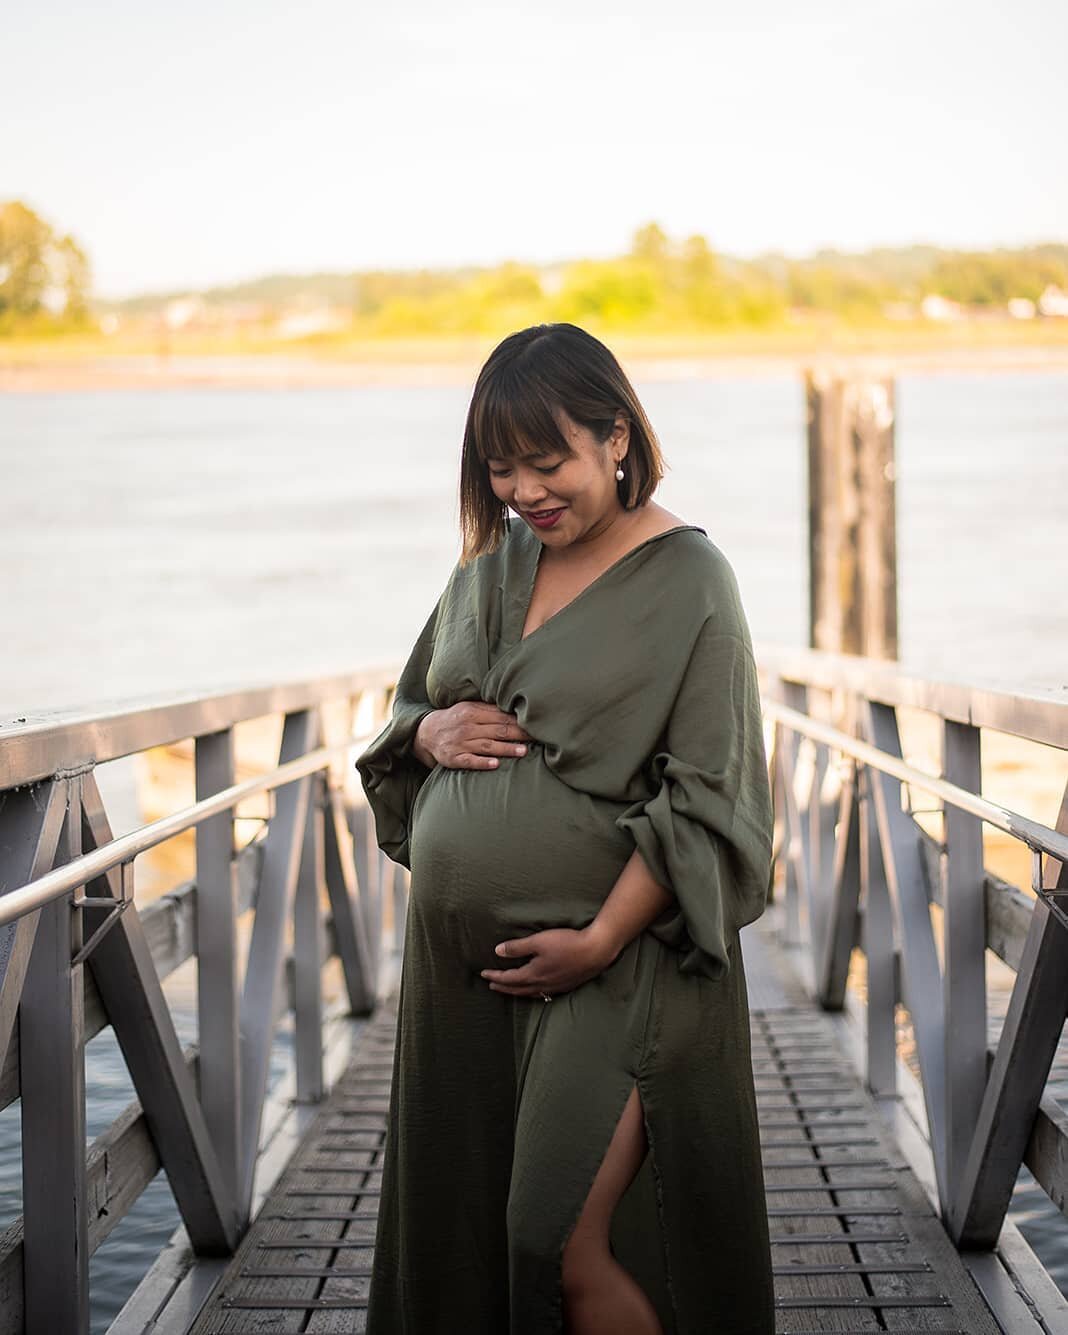 Excited to meet you soon, little babe. &hearts;️
(Photo by @nancybreephoto)